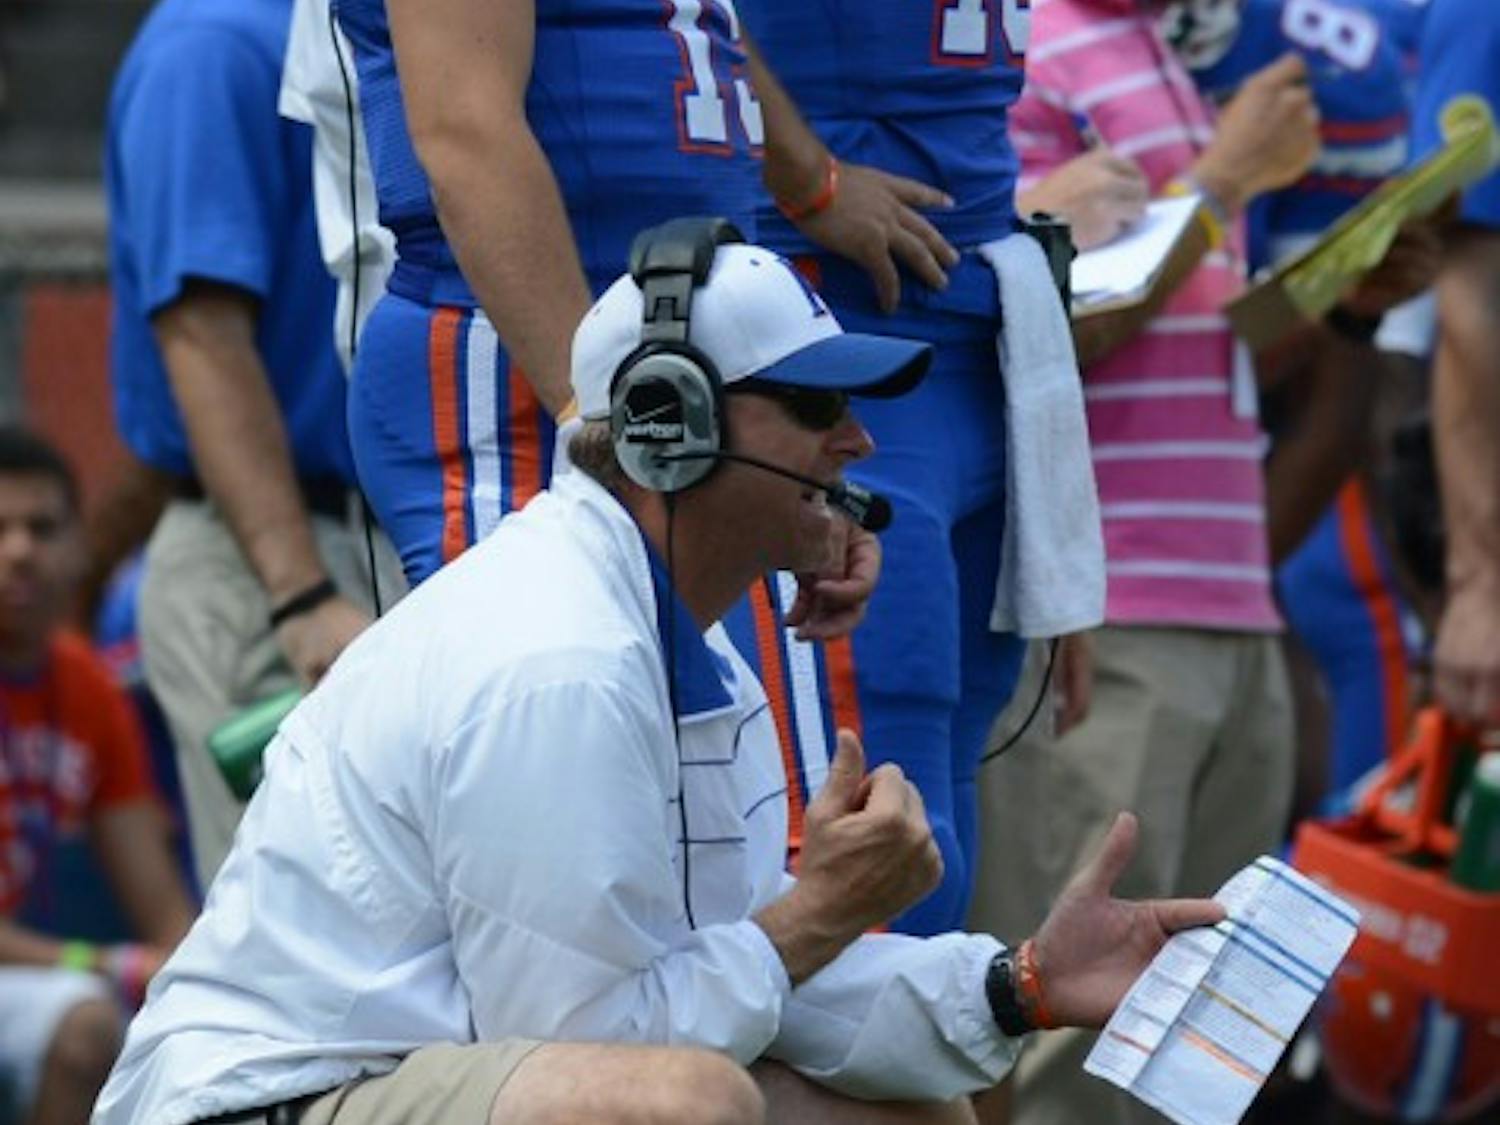 Gators offensive coordinator Brent Pease watches the action during Florida's spring game on last April at Ben Hill Griffin Stadium. Although UF has run the ball 65.8 percent of the time this season, Pease has brought creativity to the offense from his previous job as offensive coordinator at Boise State.